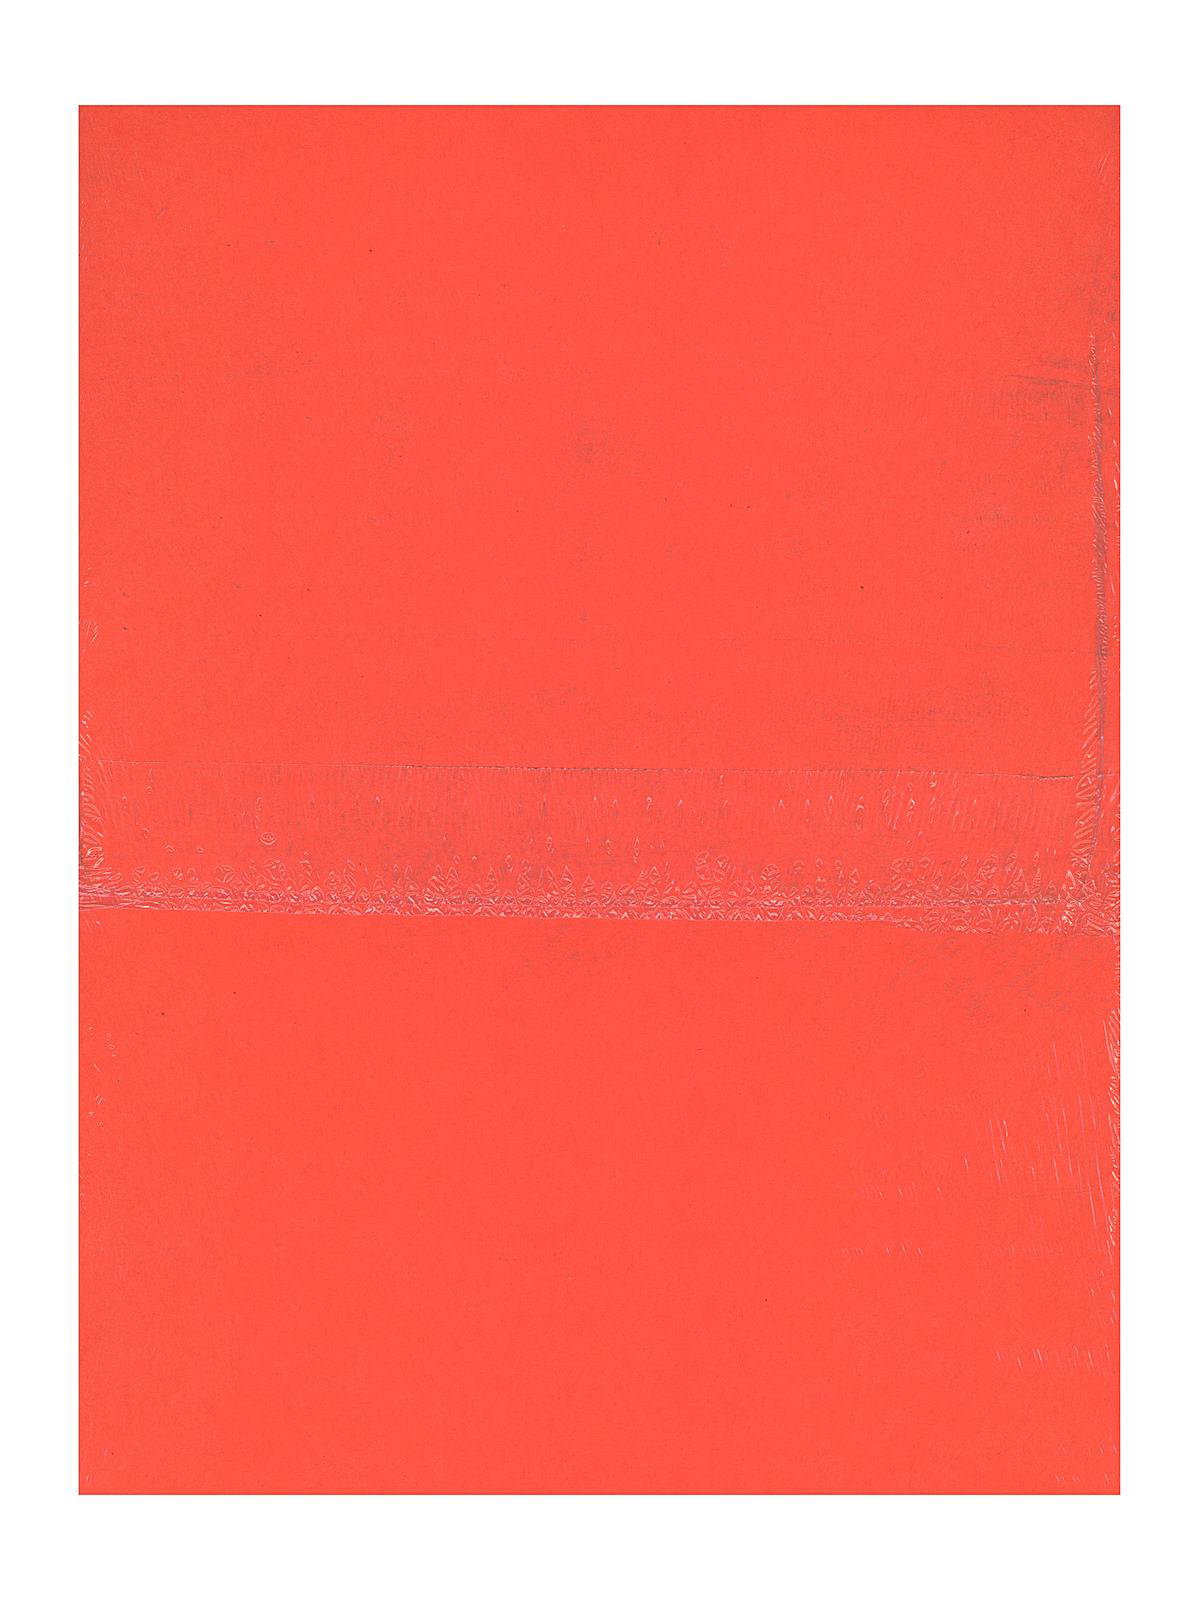 Red Construction Paper Stock Photo by ©StayceeO 11379246